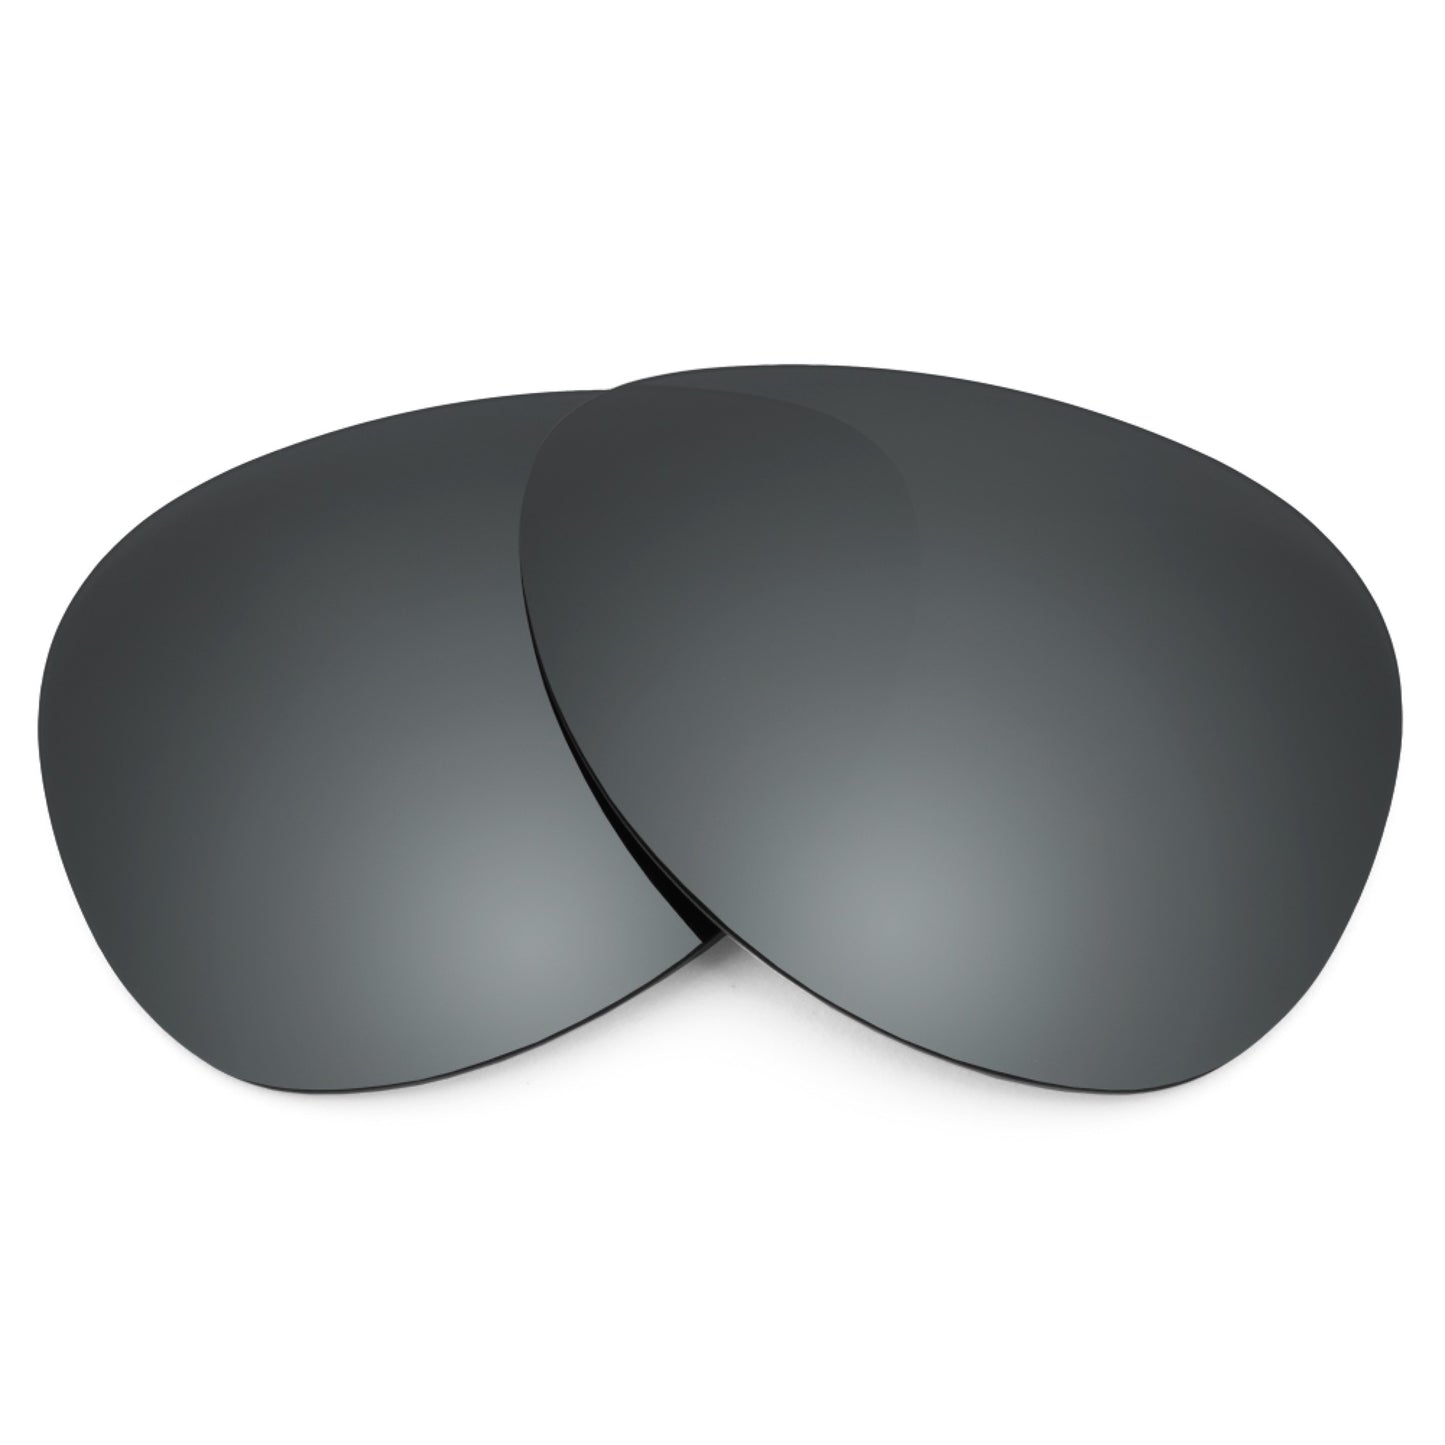 Revant replacement lenses for Ray-Ban New Aviator RB3625 55mm Non-Polarized Black Chrome